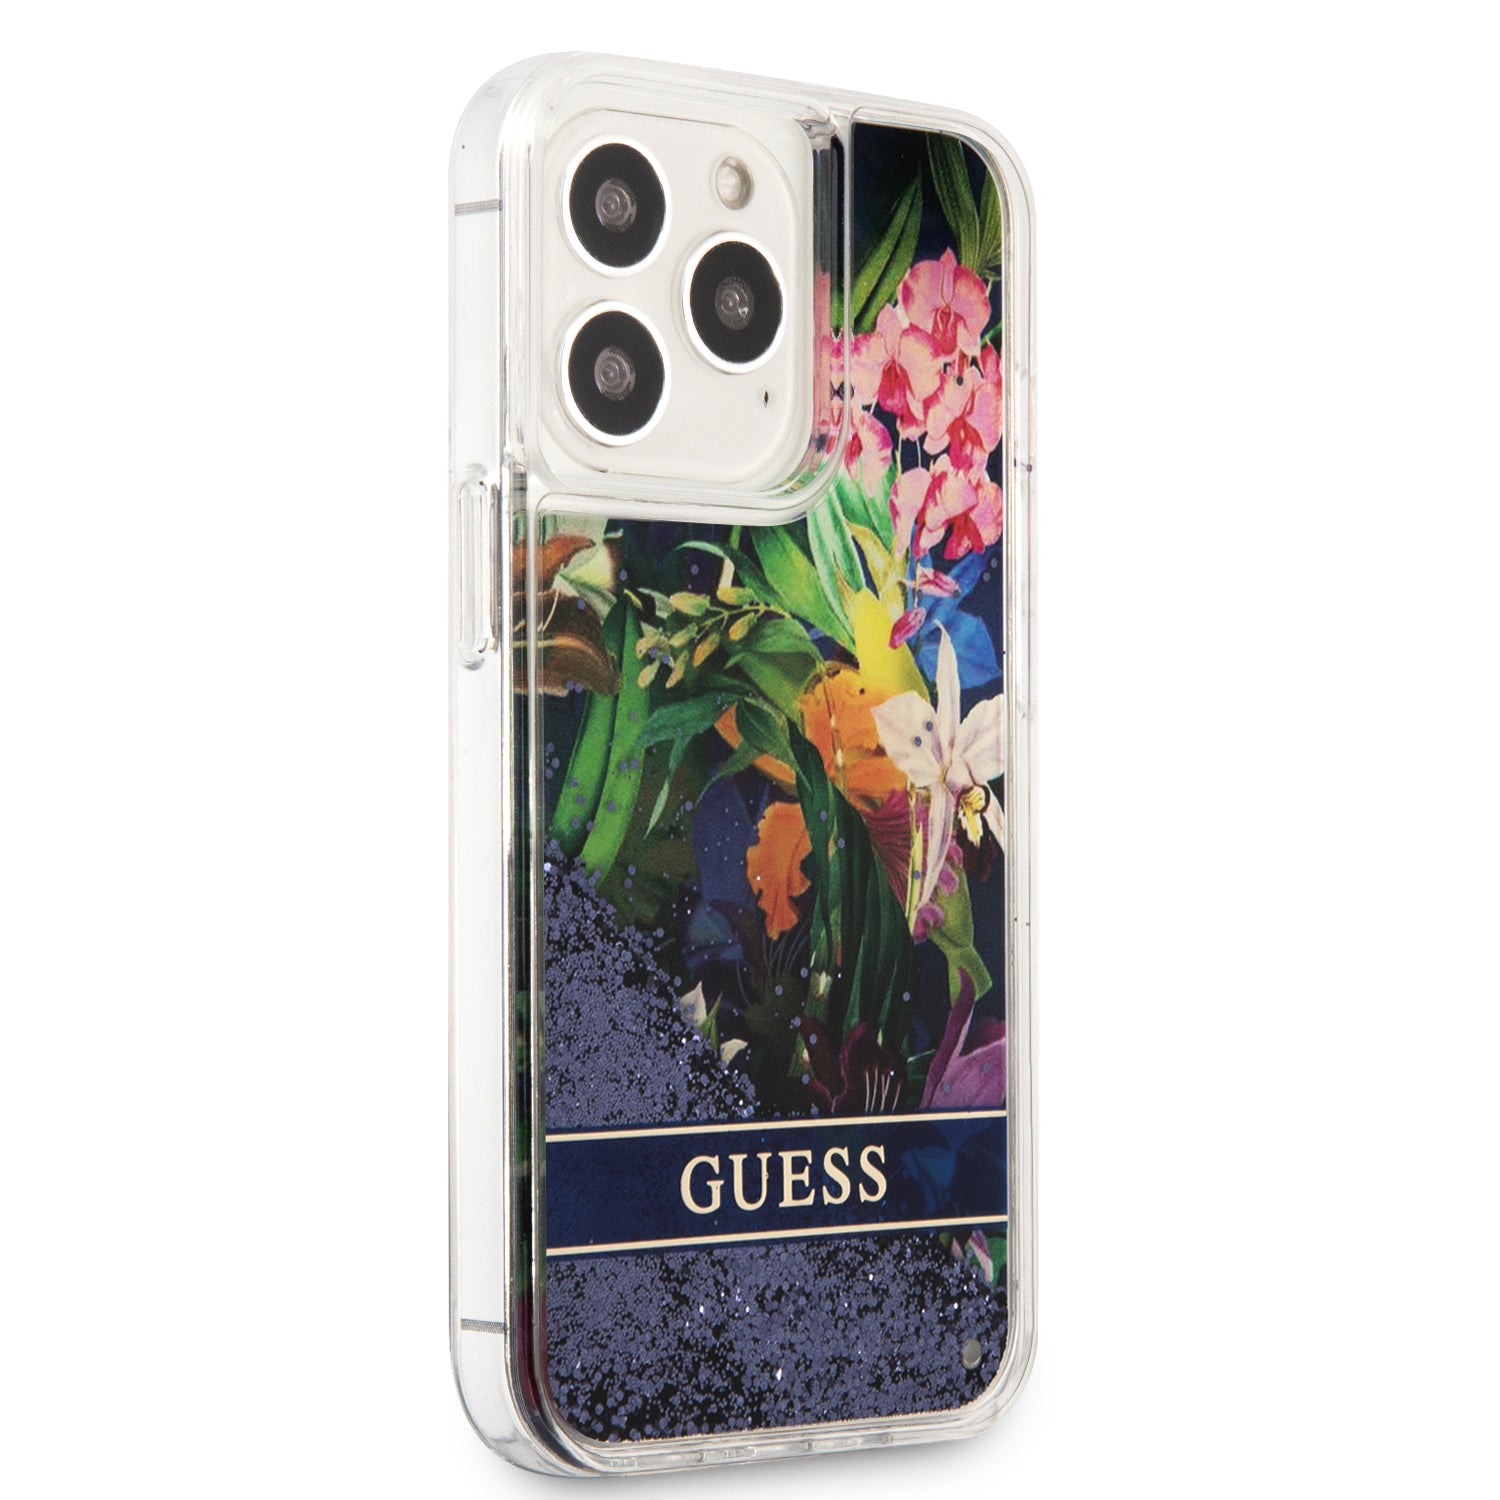 IPHONE 14 PRO MAX GUESS CHARM CAFE